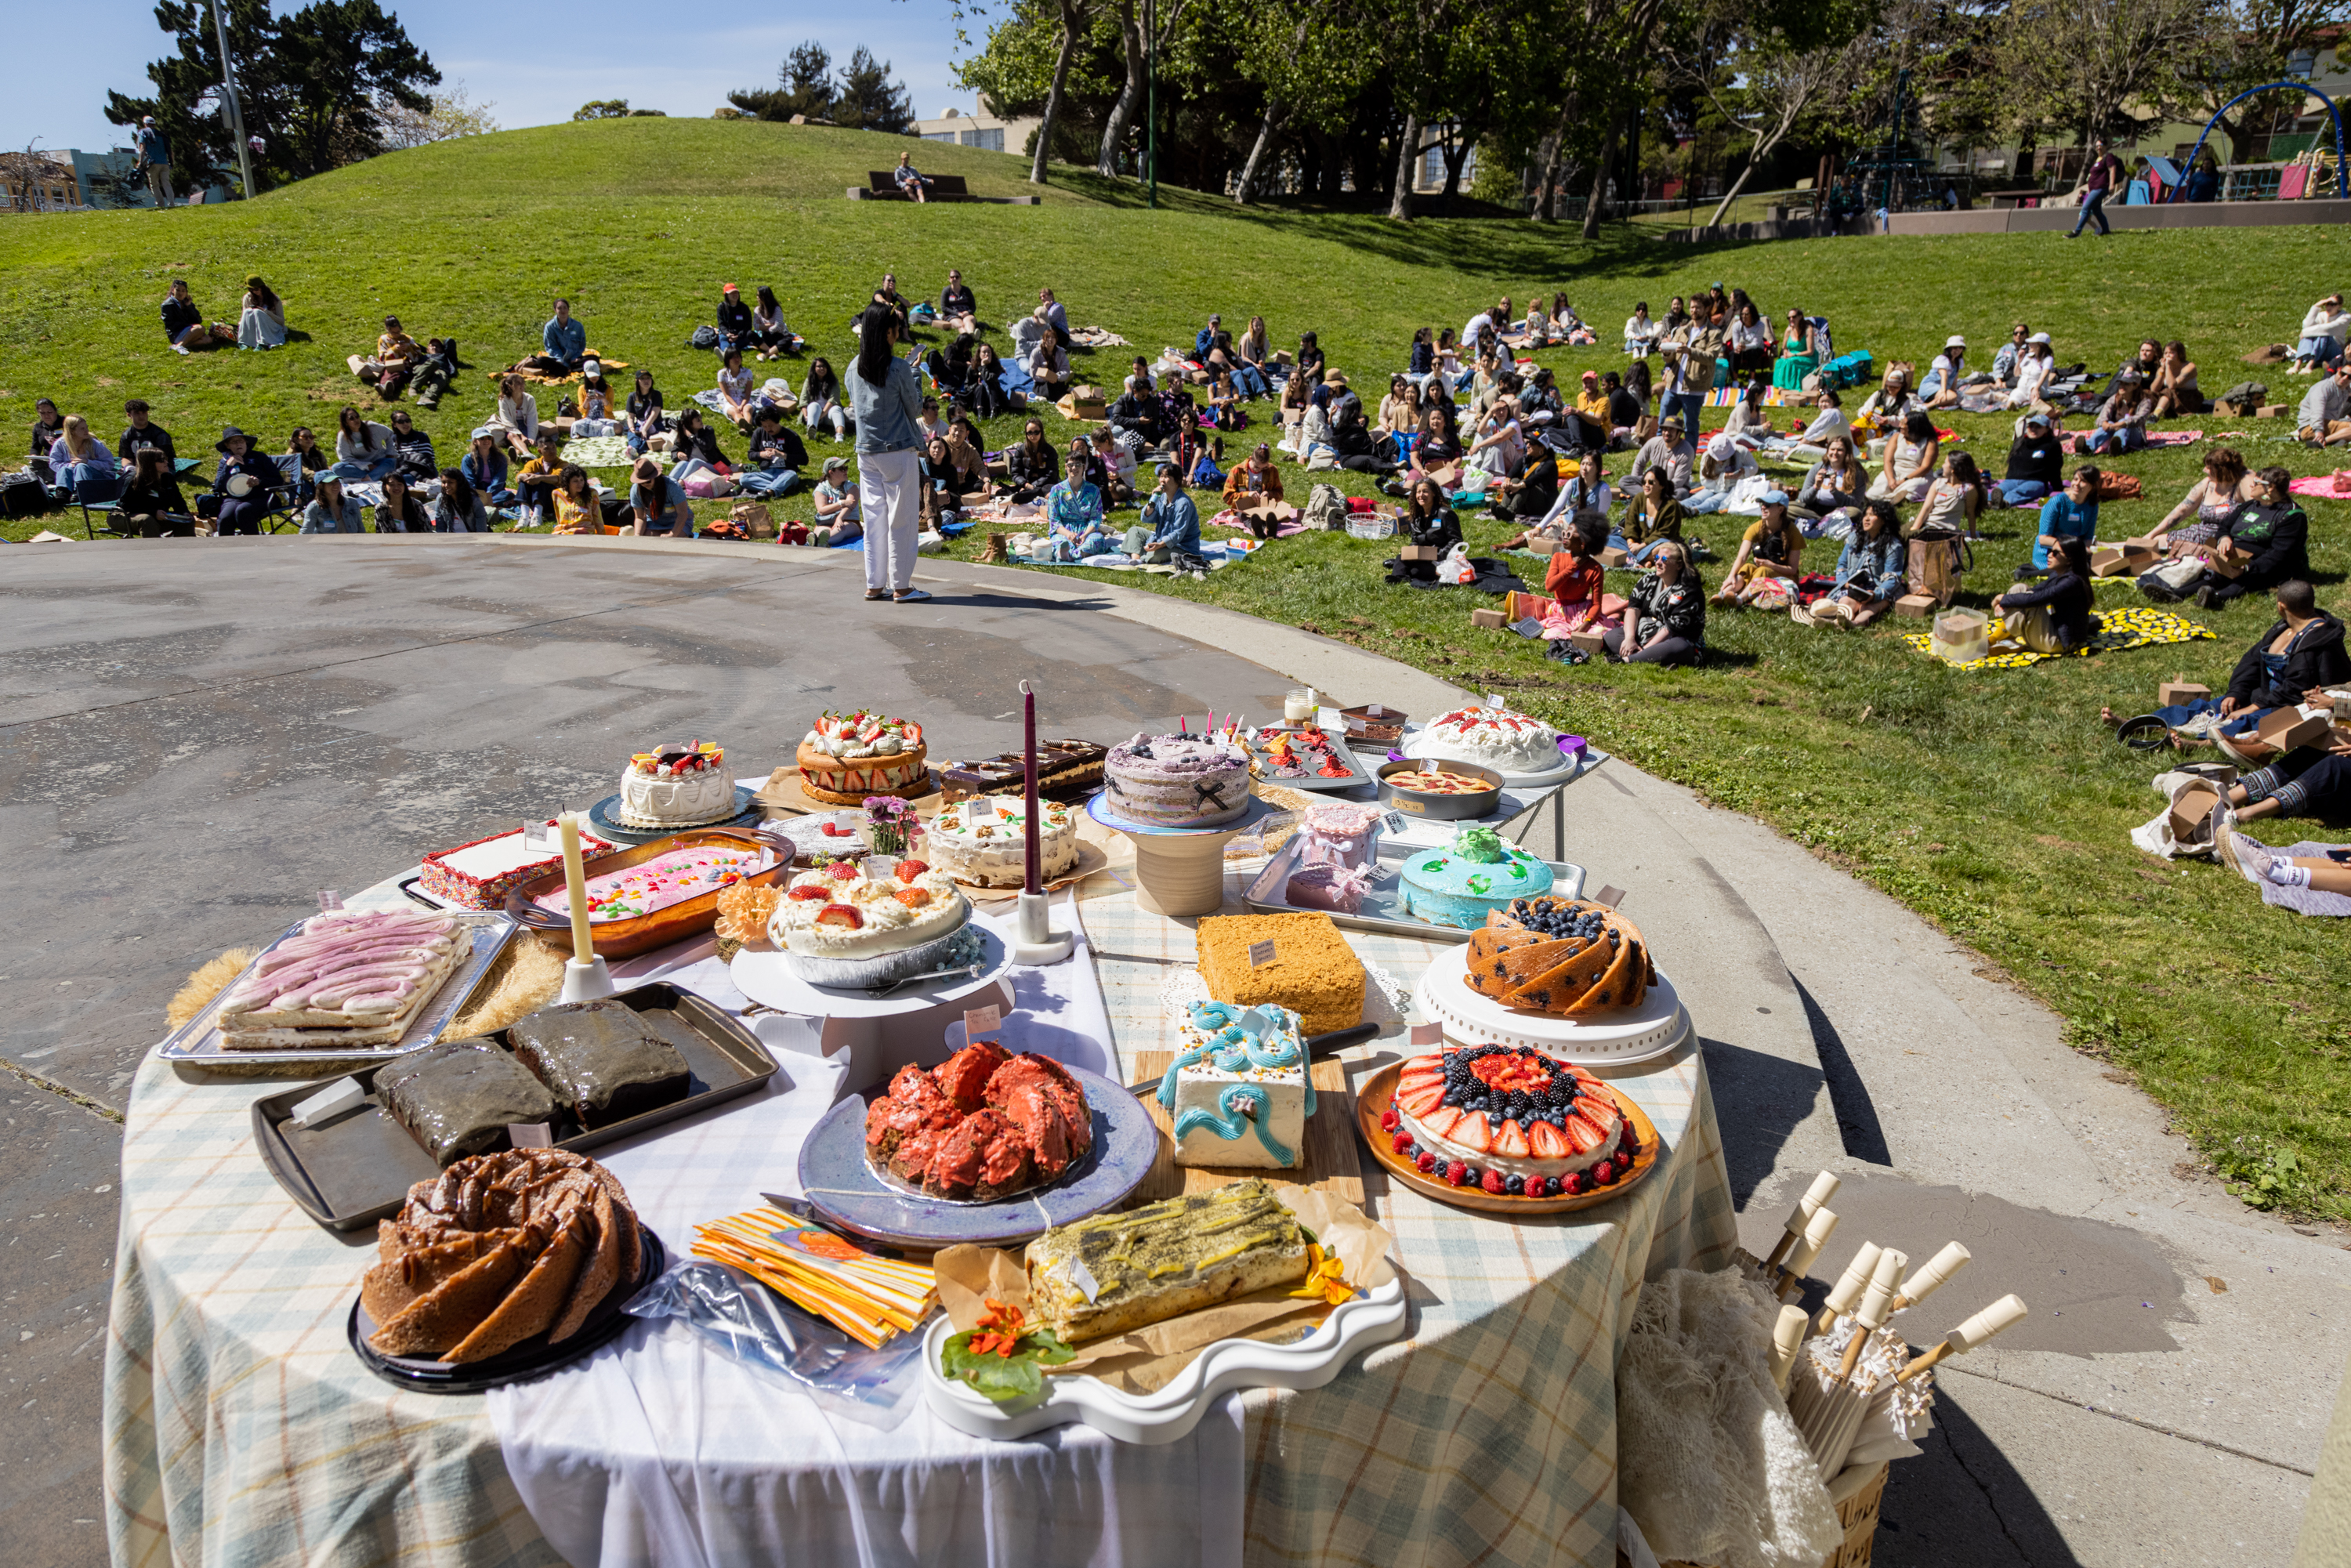 A potluck with various dishes on tables, and people sitting on grass enjoying the sunny park setting.